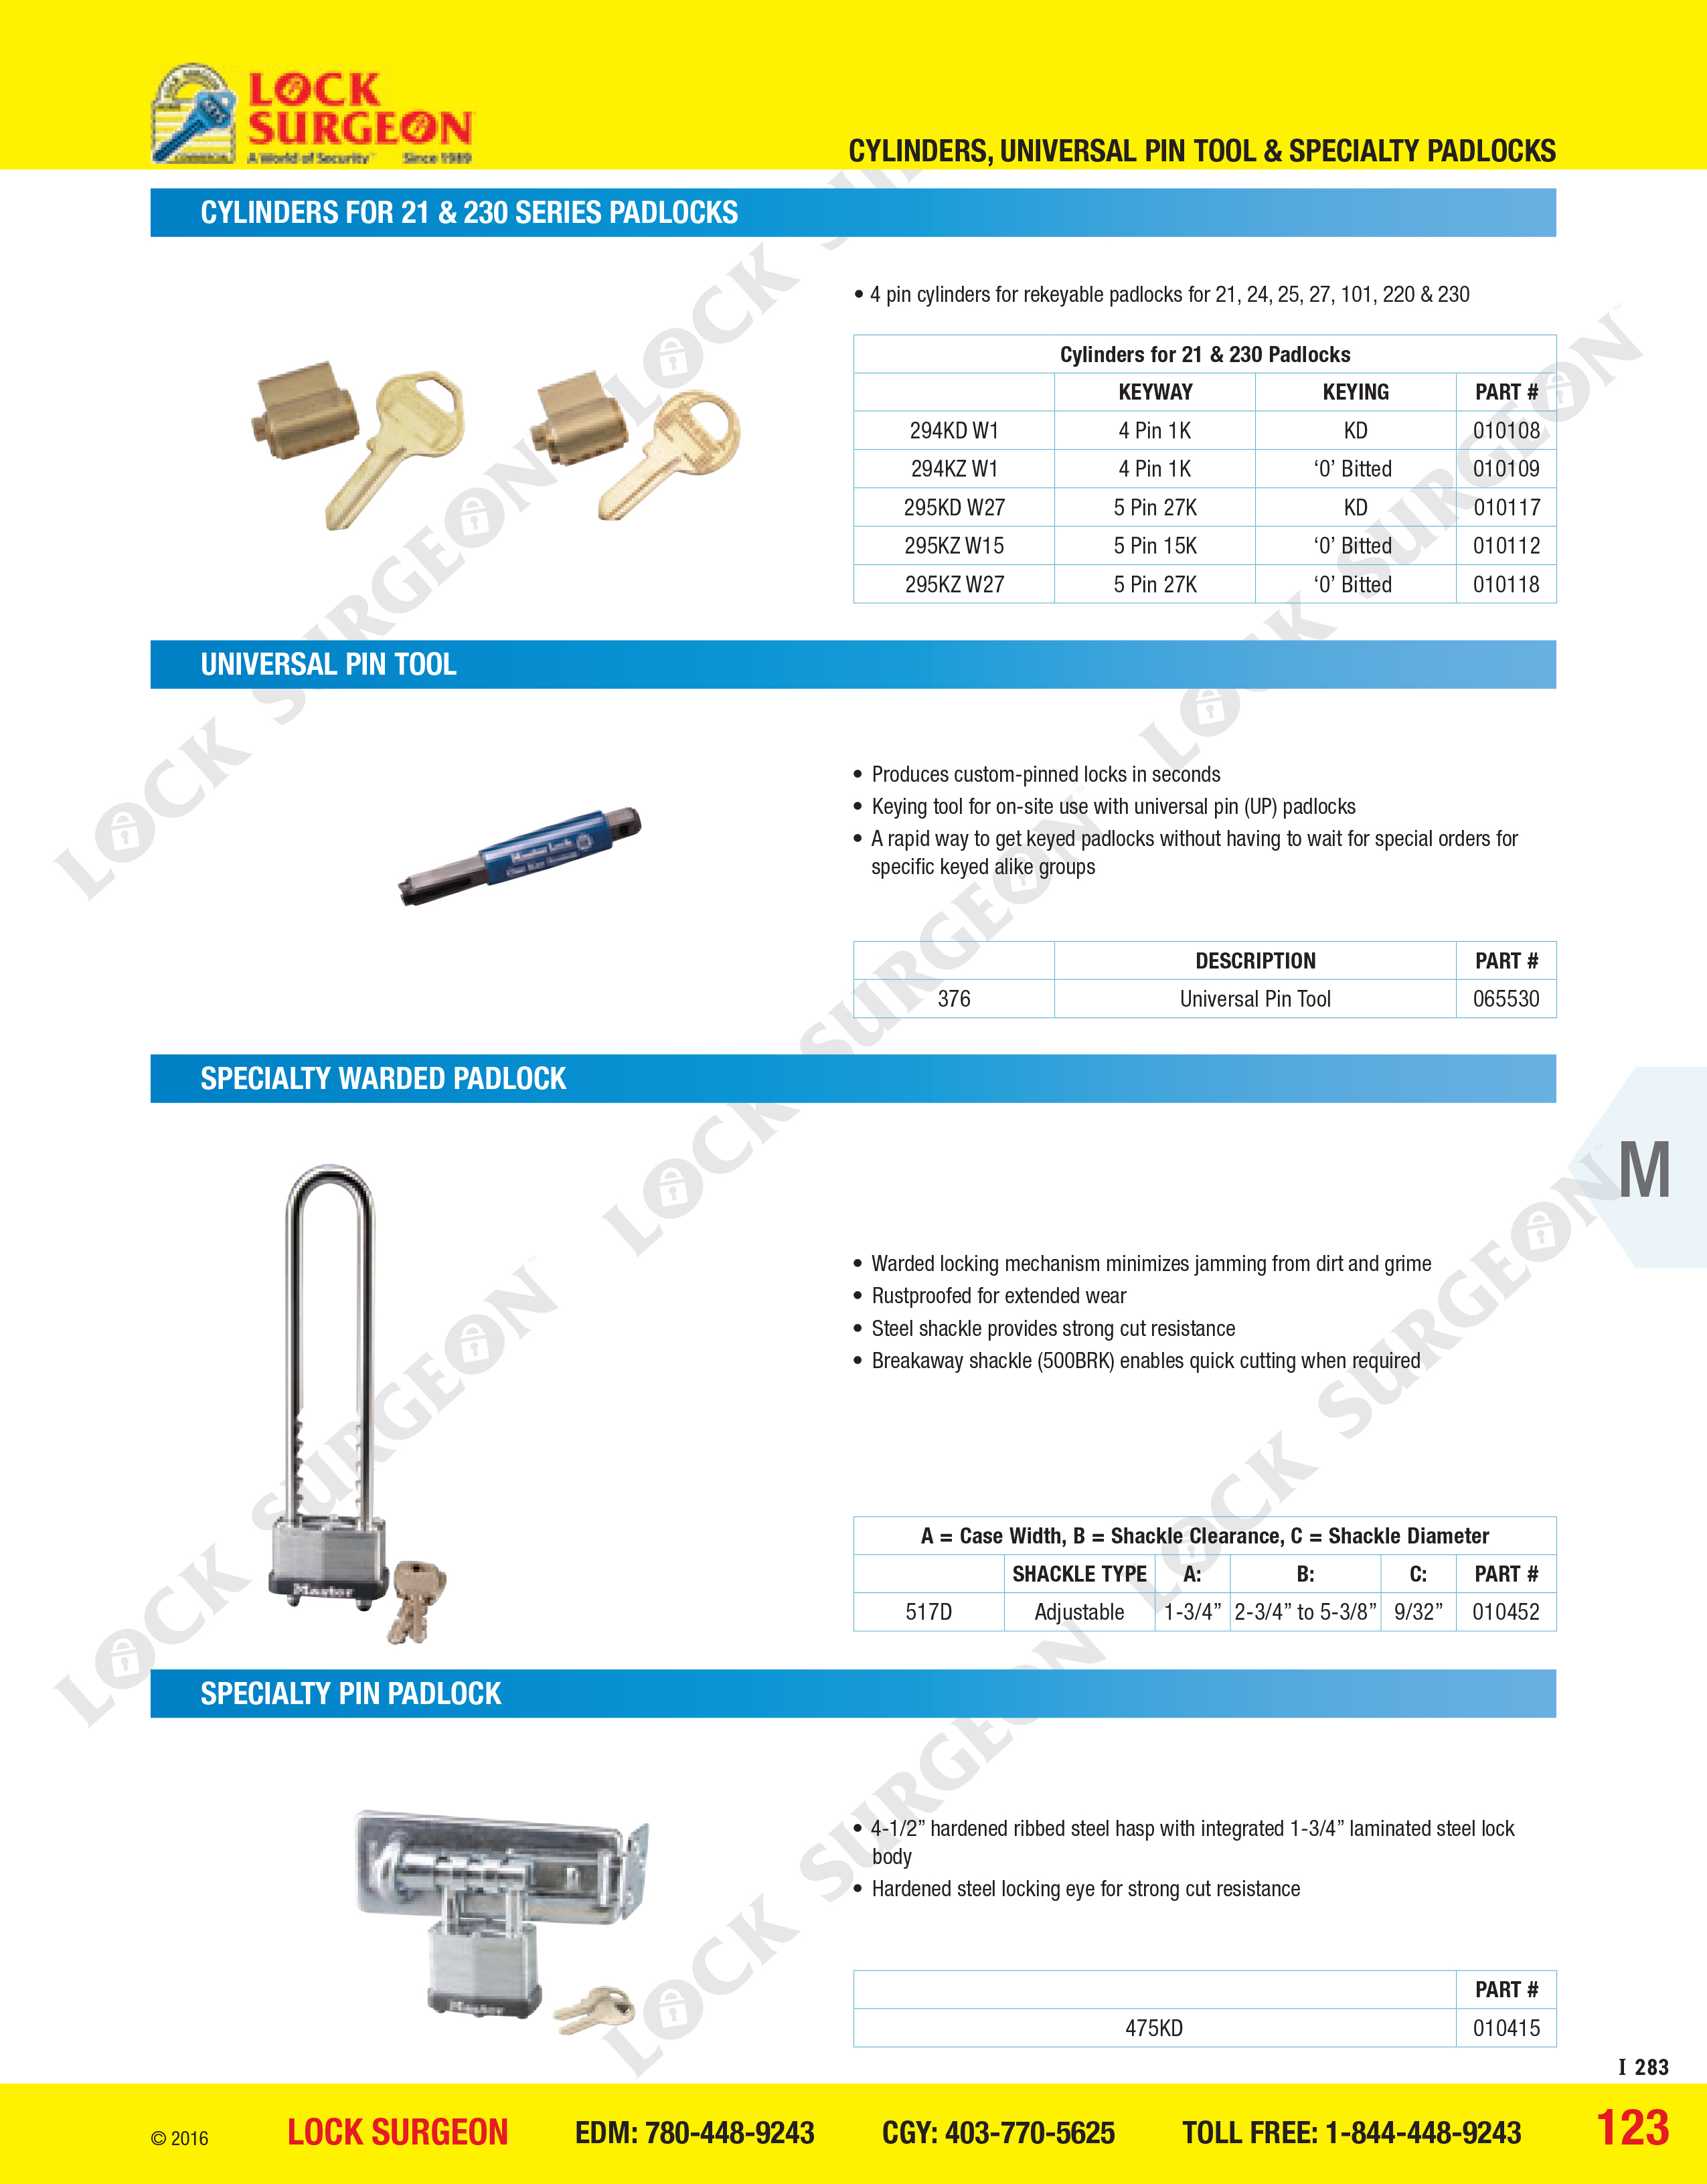 Cylinders for 21 and 230 series universal pin tool specialty warded and specialty pin padlock